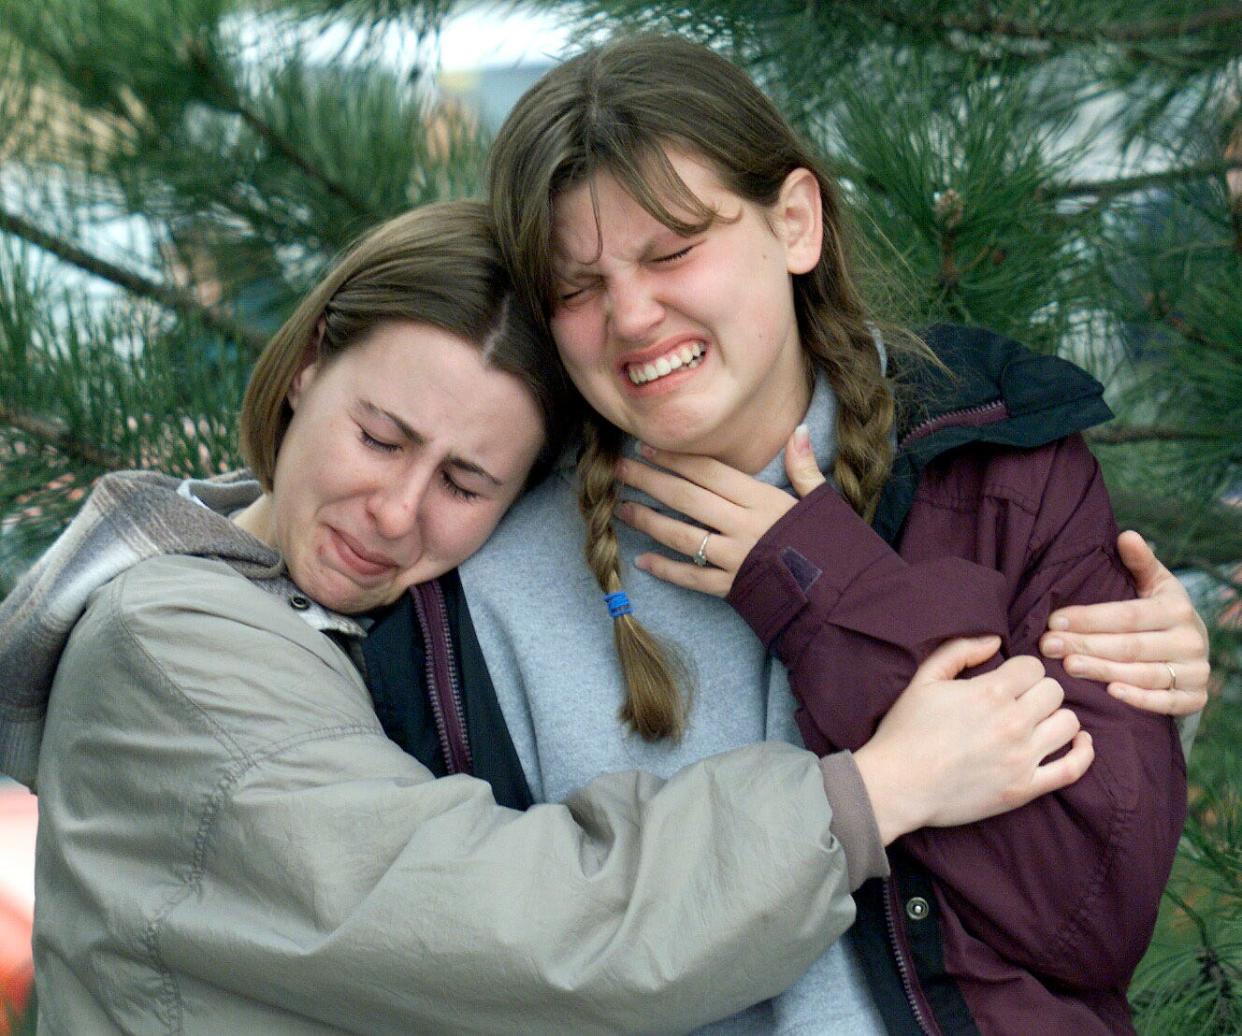 In this April 21 file photo, Shaleane Elliott, 21, a graduate of Columbine High, and Emily Stepp, 18, a senior at the school, weep for friends killed in the shooting at an impromptu memorial near the school in Littleton, Colorado.